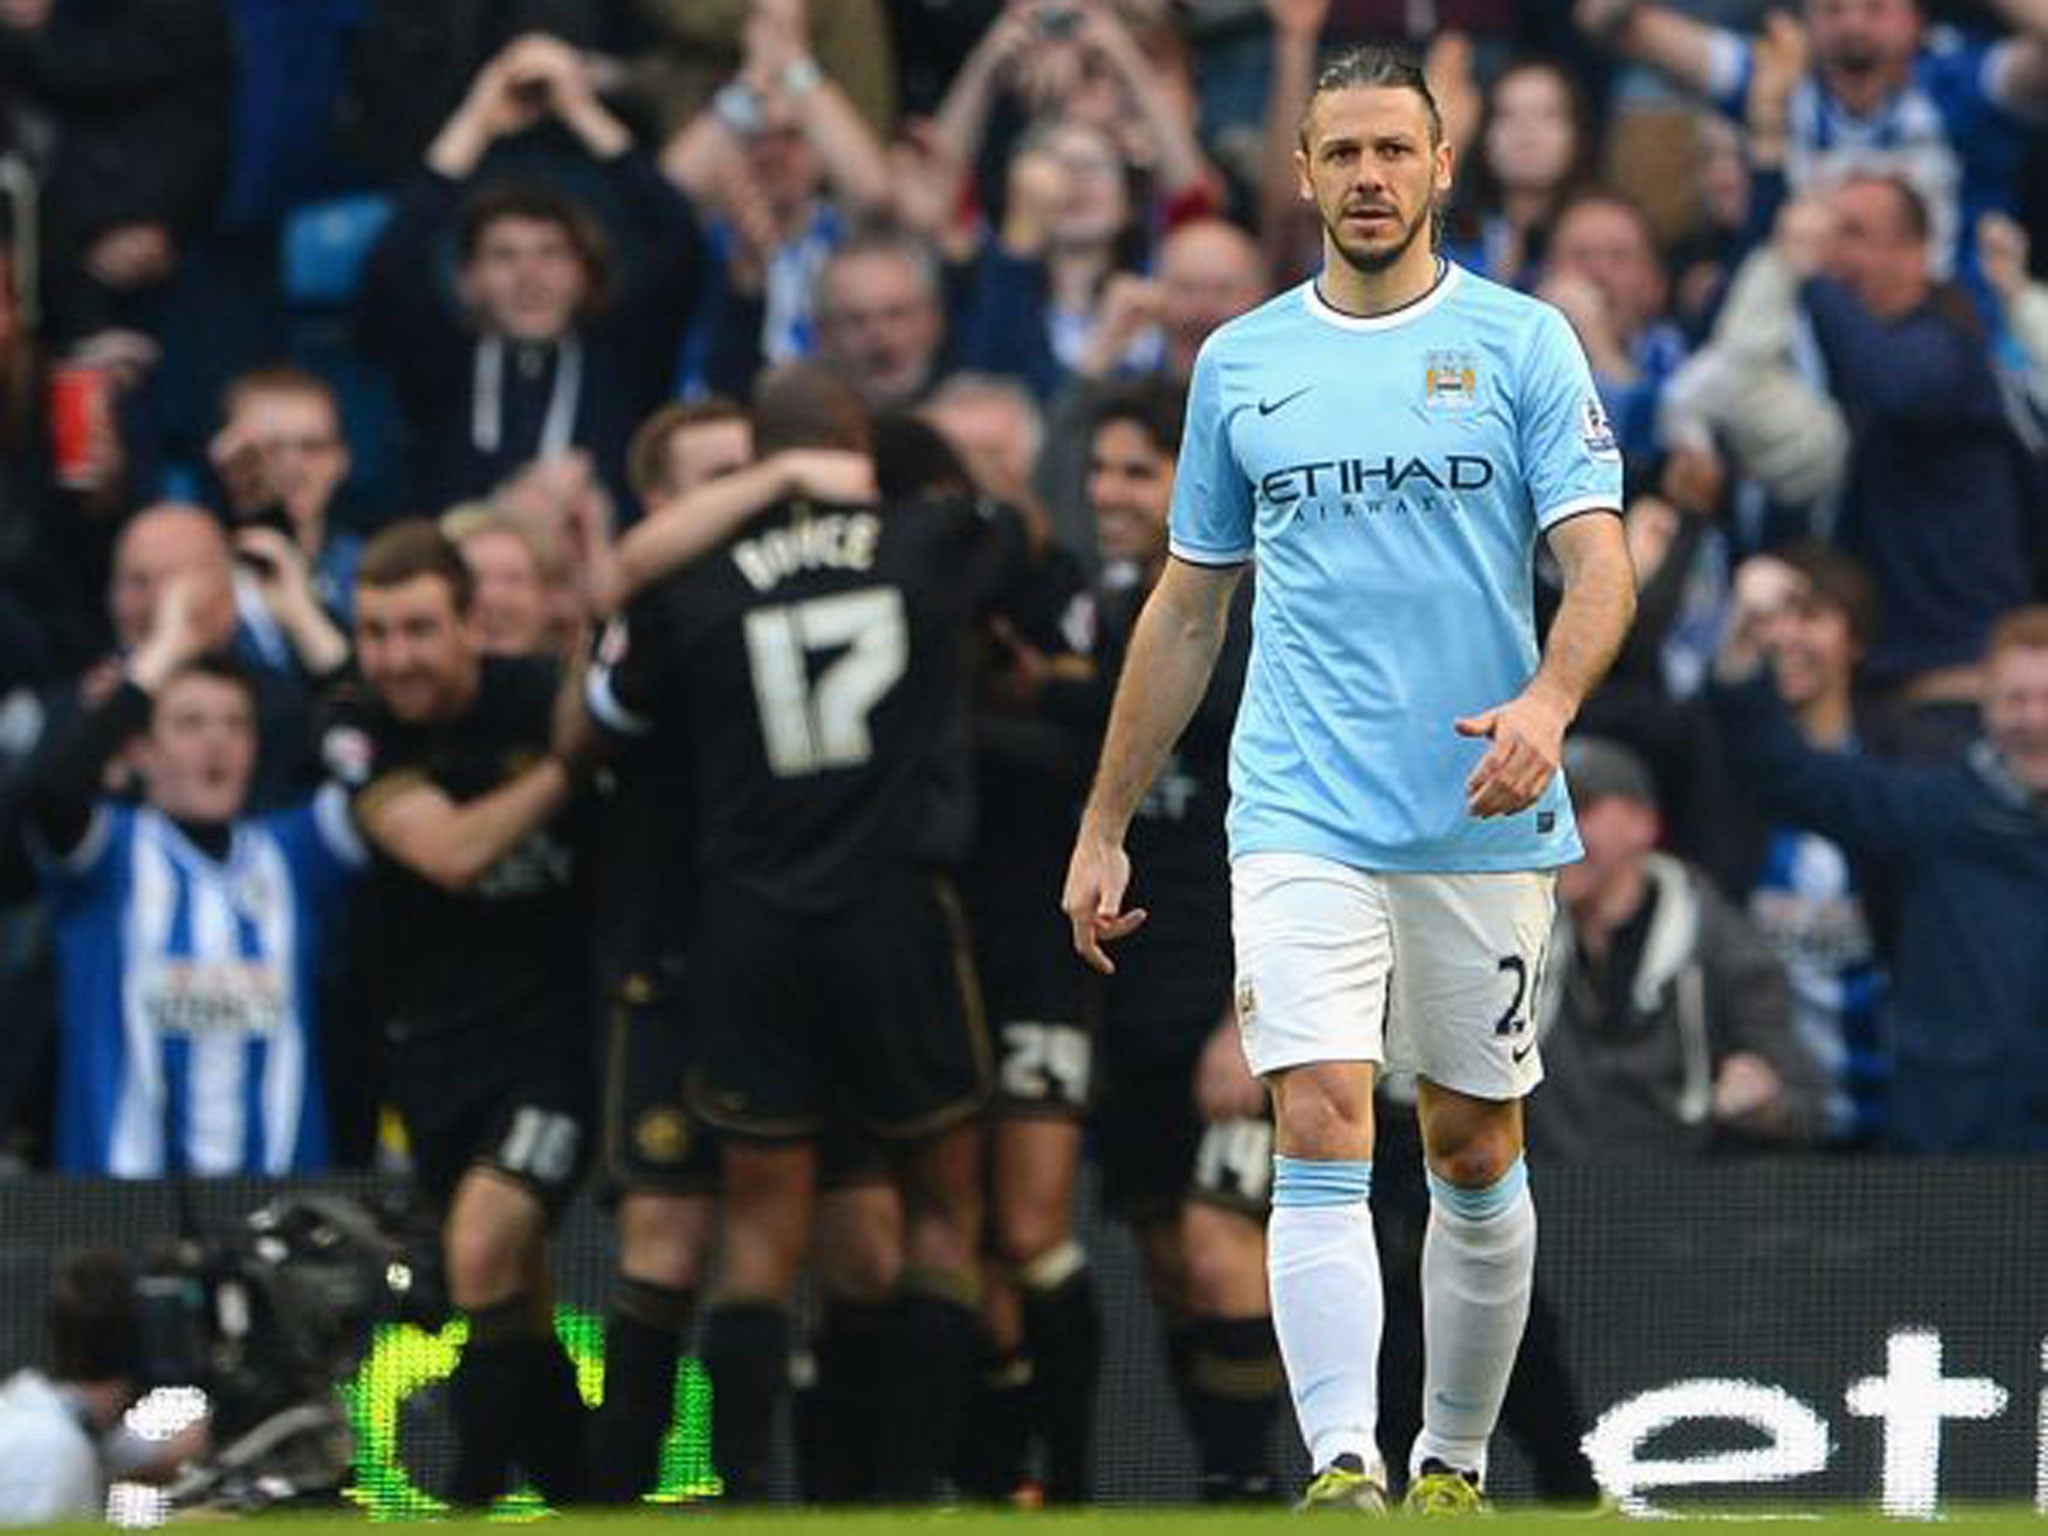 Martin Demichelis endured a tough start at Manchester City but improved towards the end of the season